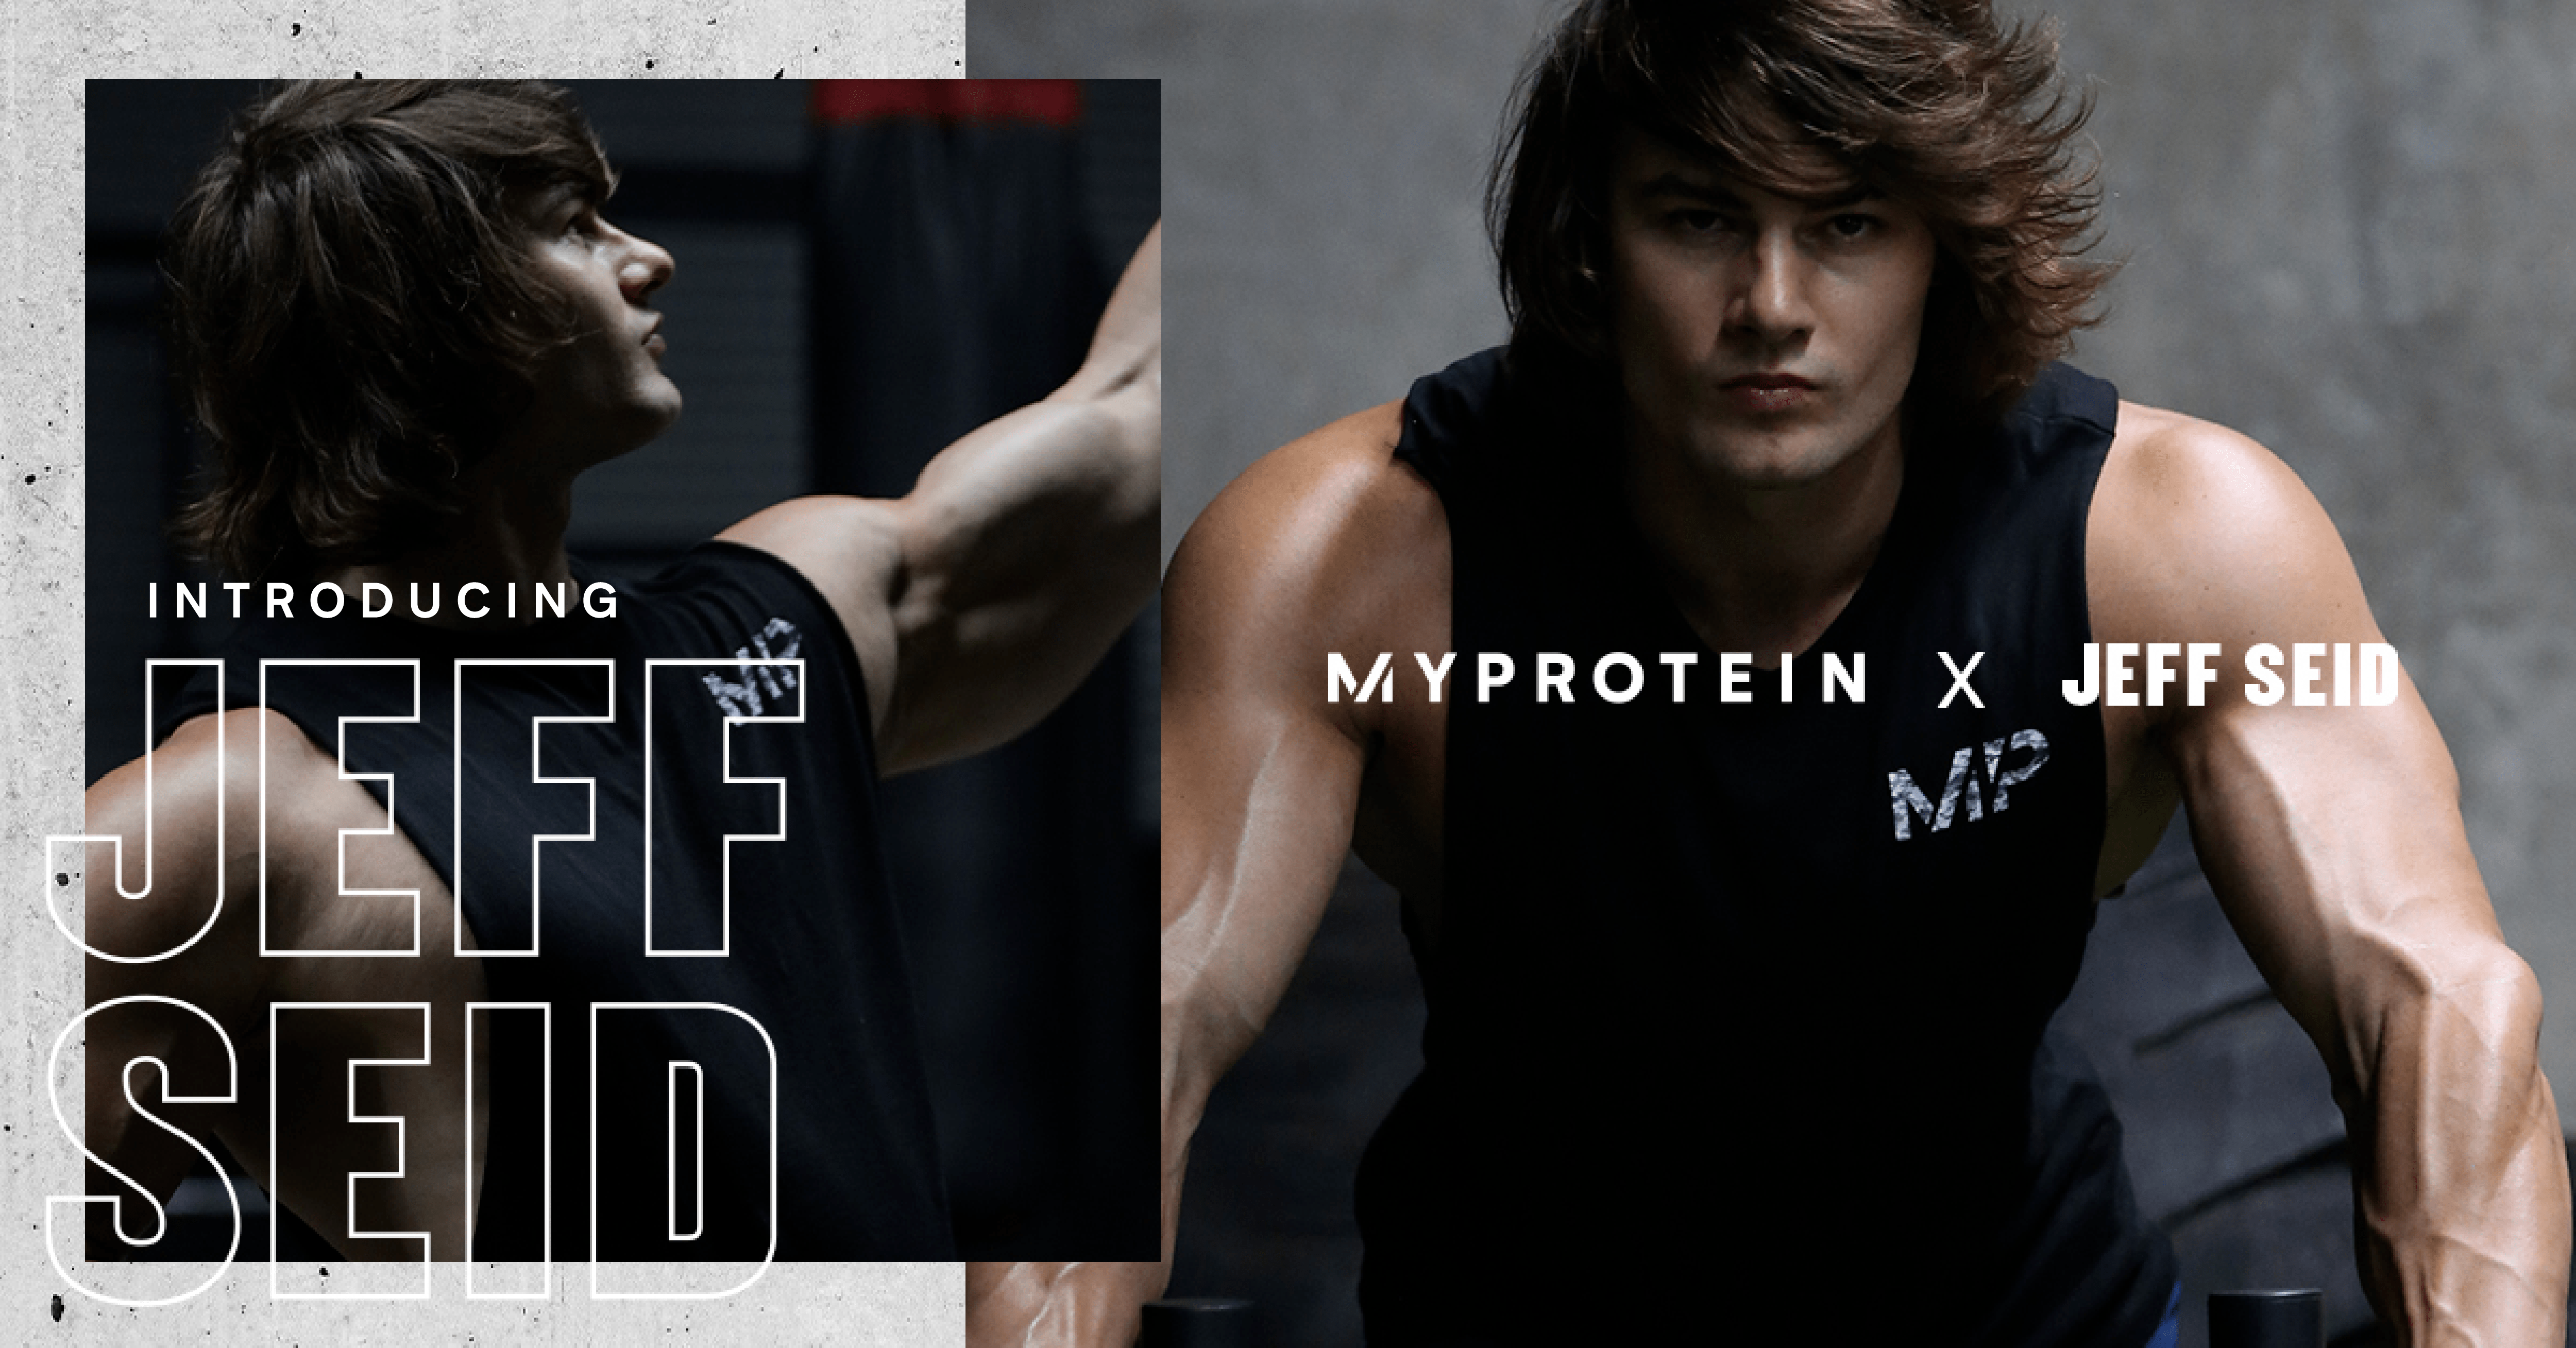 Introducing Jeff Seid | The Newest Member of Team Myprotein